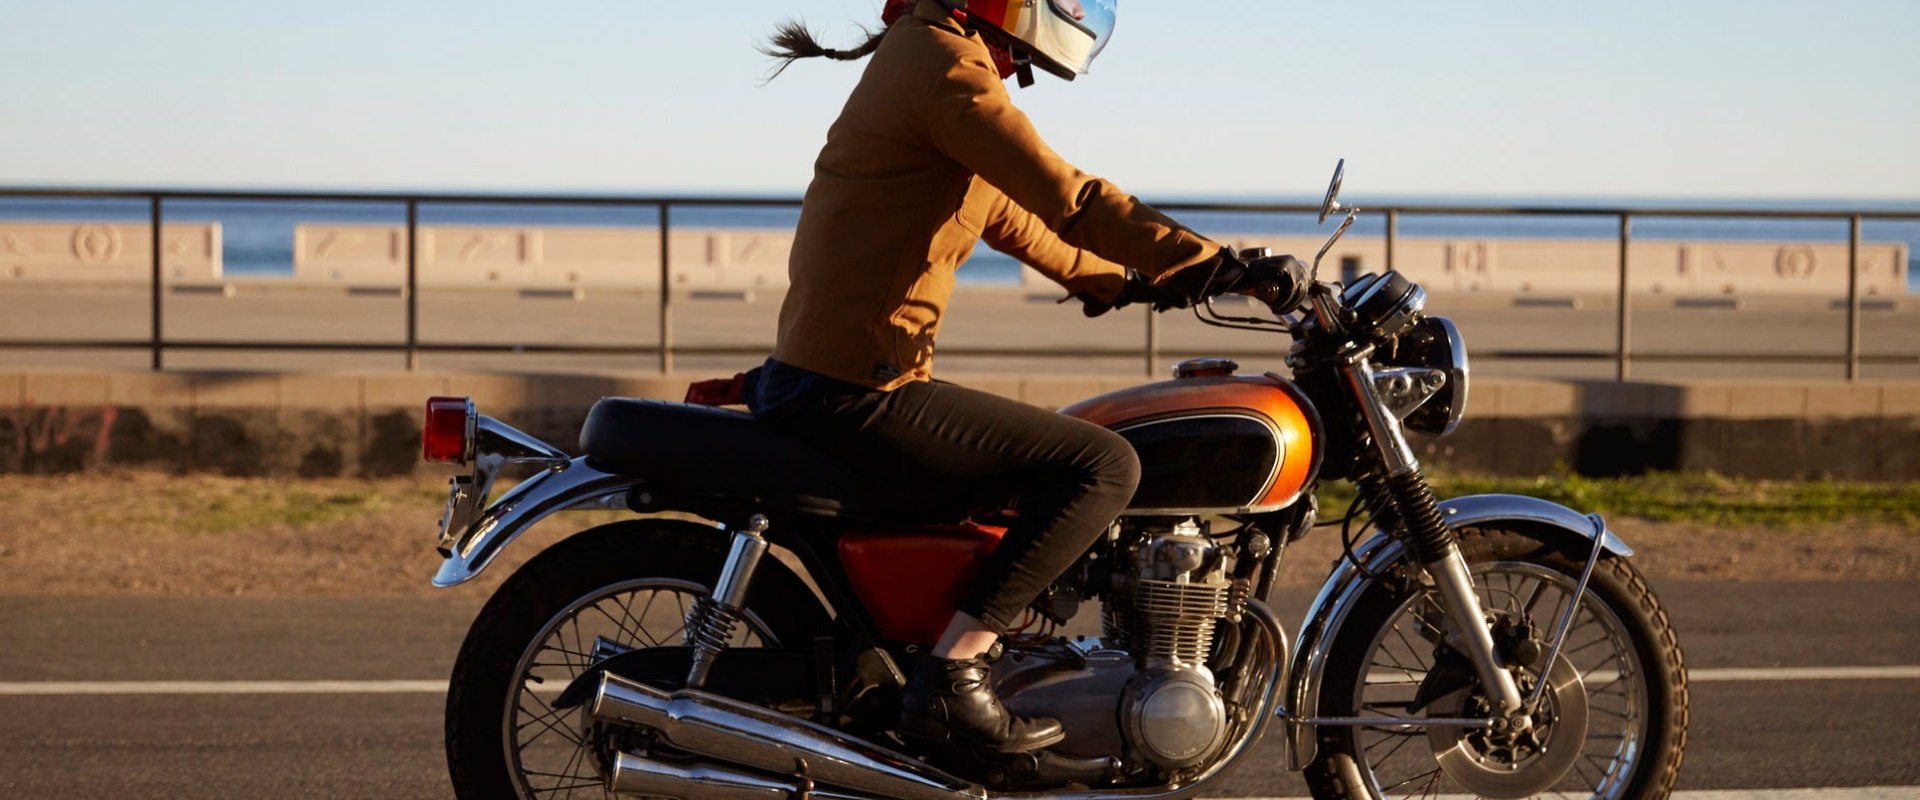 Minimum Motorcycle Insurance Cost In New York